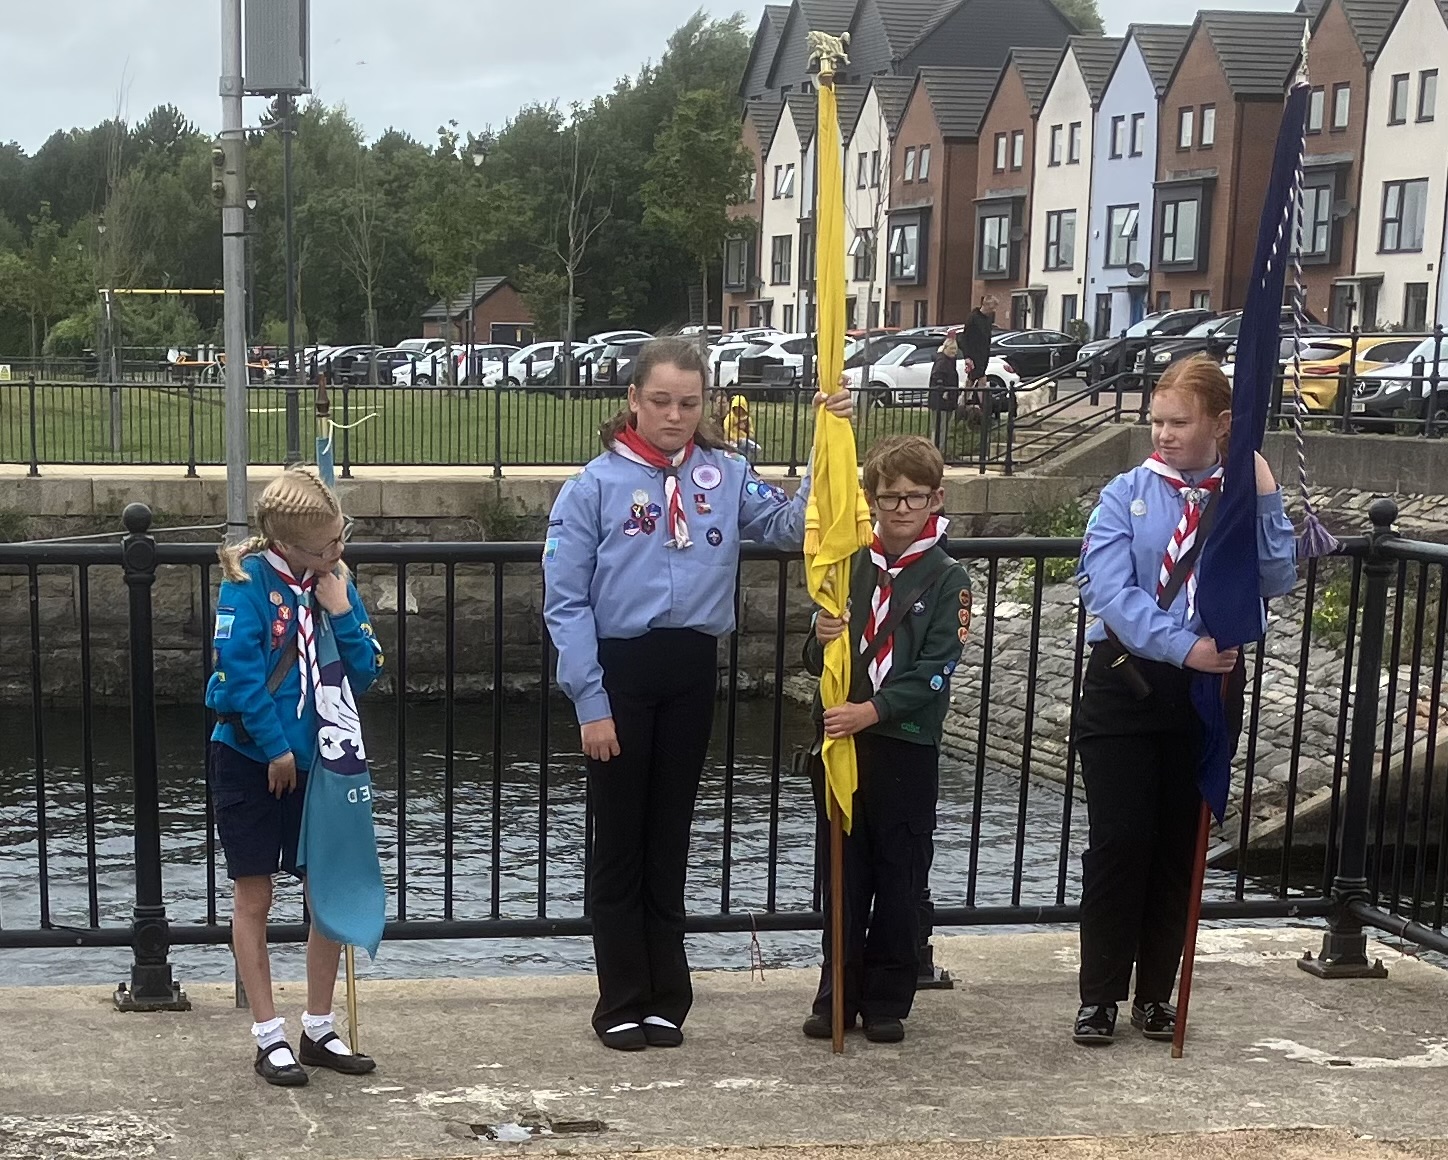 STANDARD BEARERS OF THE FUTURE 11TH BARRY SEA SCOUTS GROUP